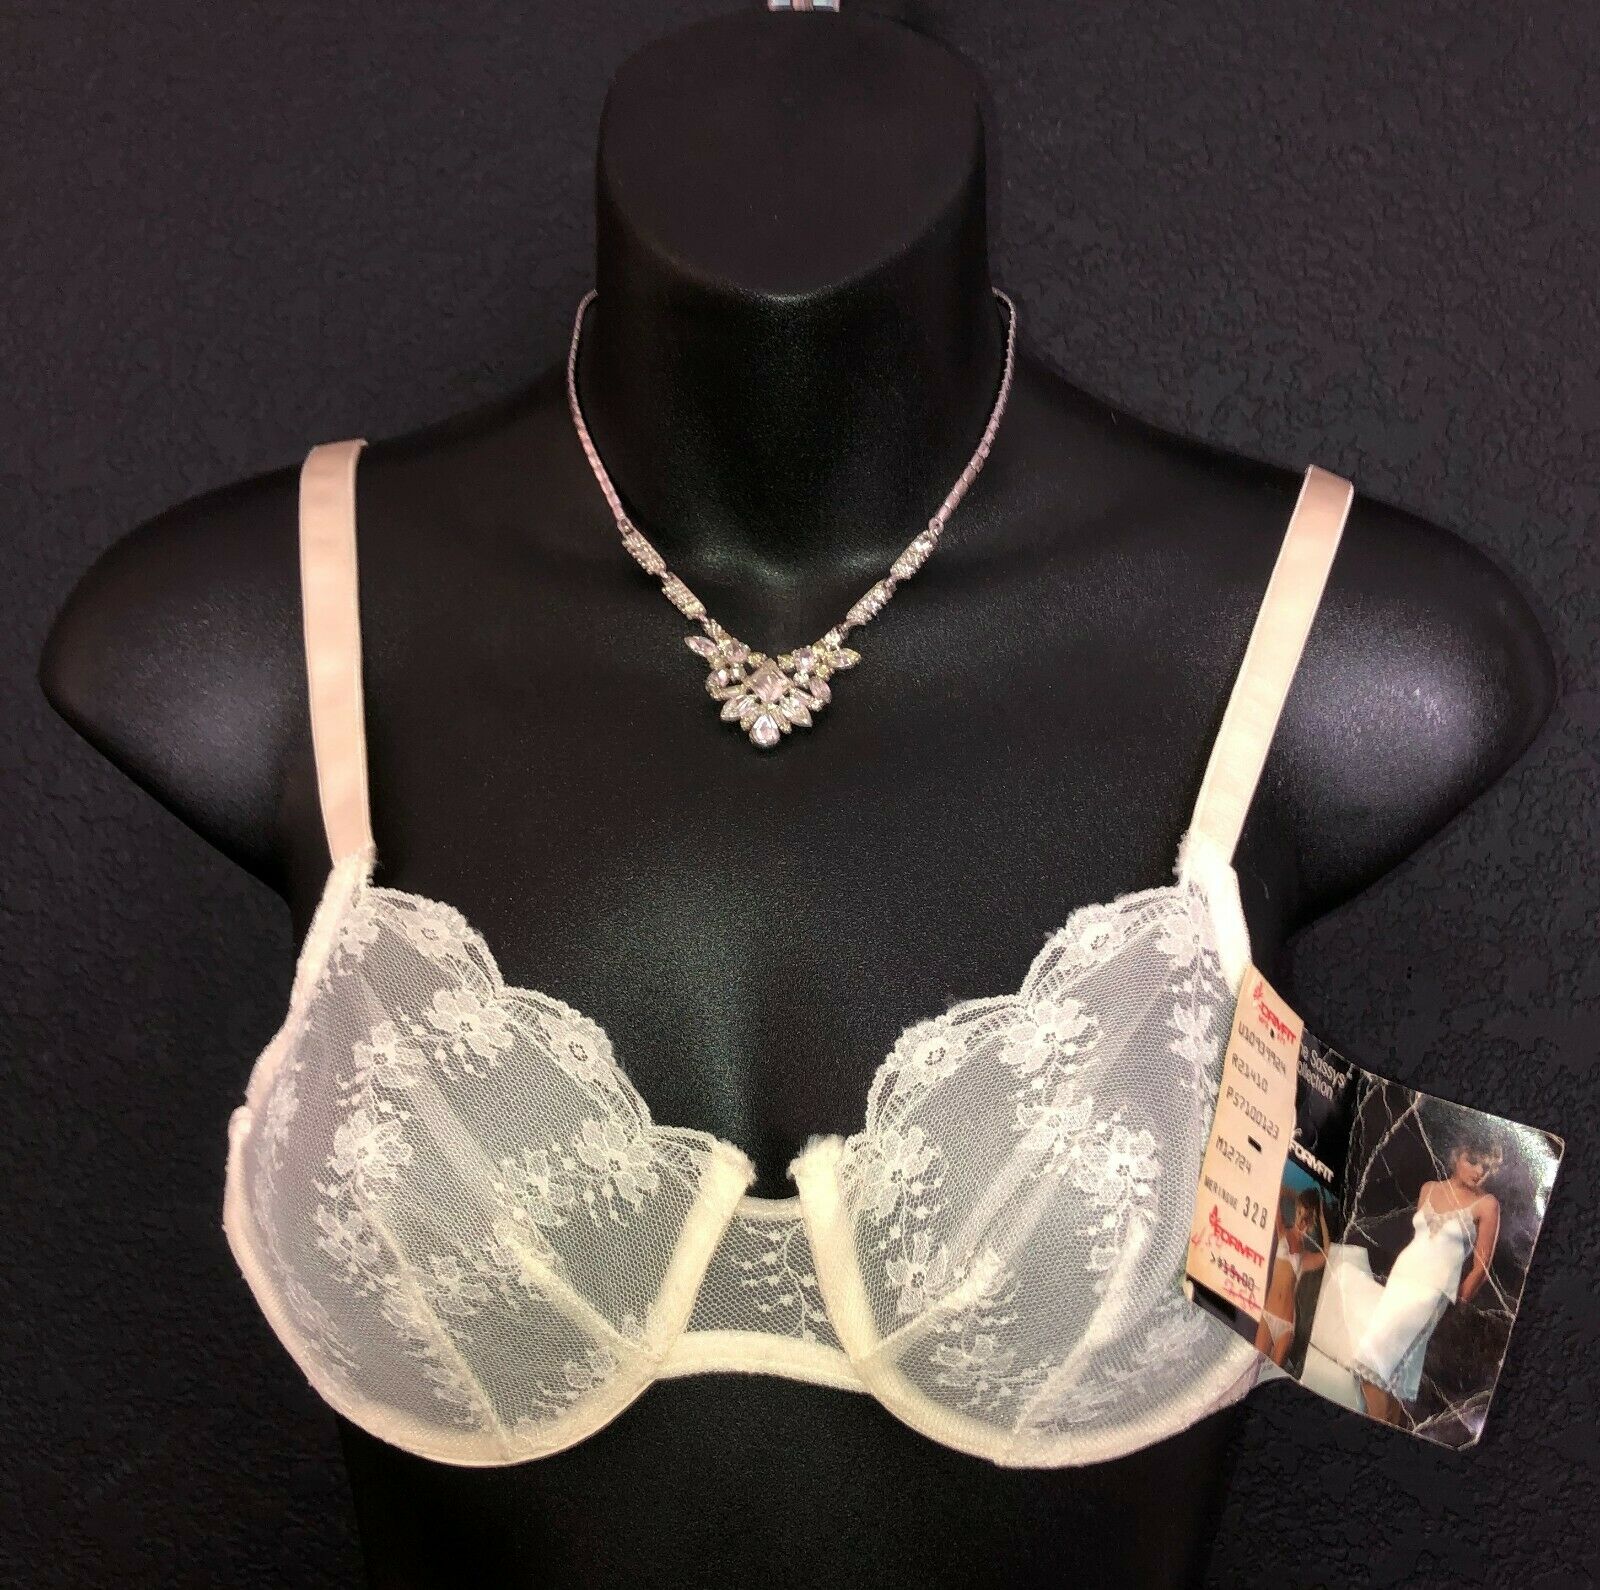 Very Sexy Nos Vintage 1970's Formfit "sassys Collection" Sheer Lace Cup Bra 32b